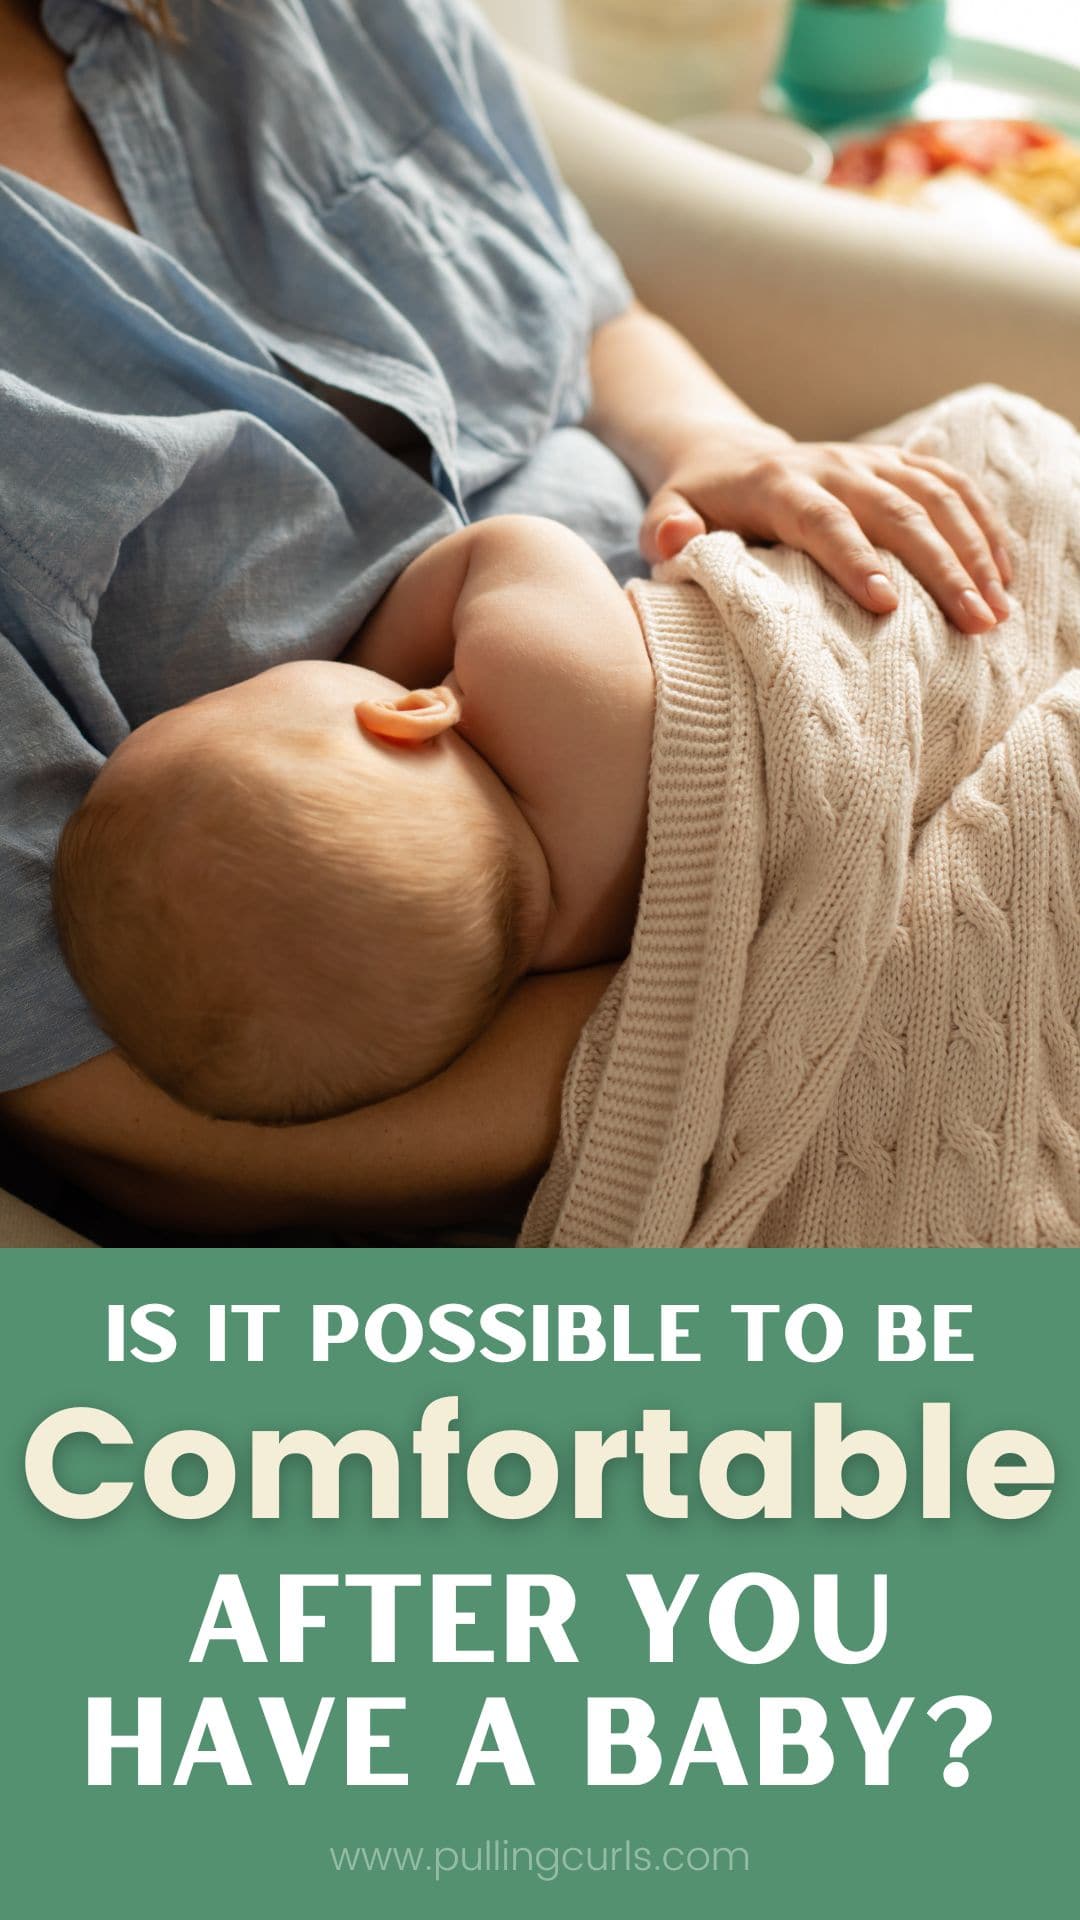 It hurts, you're tired, it hurts, your baby sucks on parts of you, you're tired, it hurts.  There's no leaving it behind, it's attached to you.  The postnatal monkey on your back.  Well, here are my 10 tips to make that a tad more comfortable -- postpartum comforts, if you will. via @pullingcurls